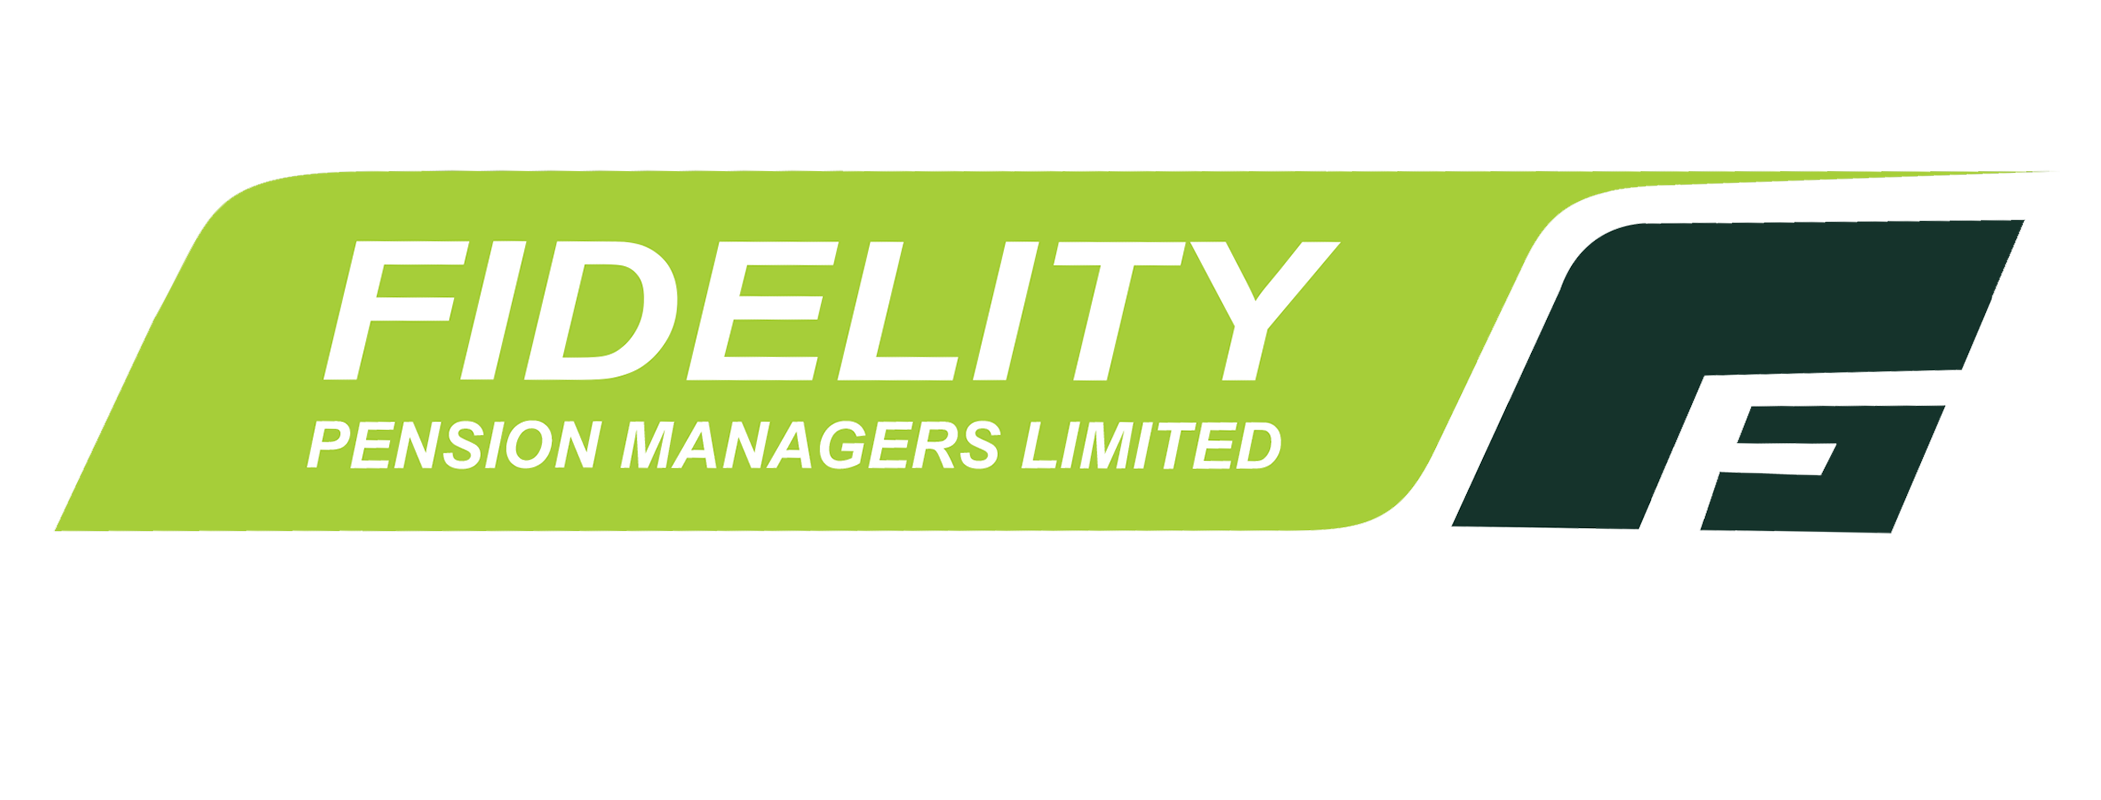 Fidelity Pension Managers